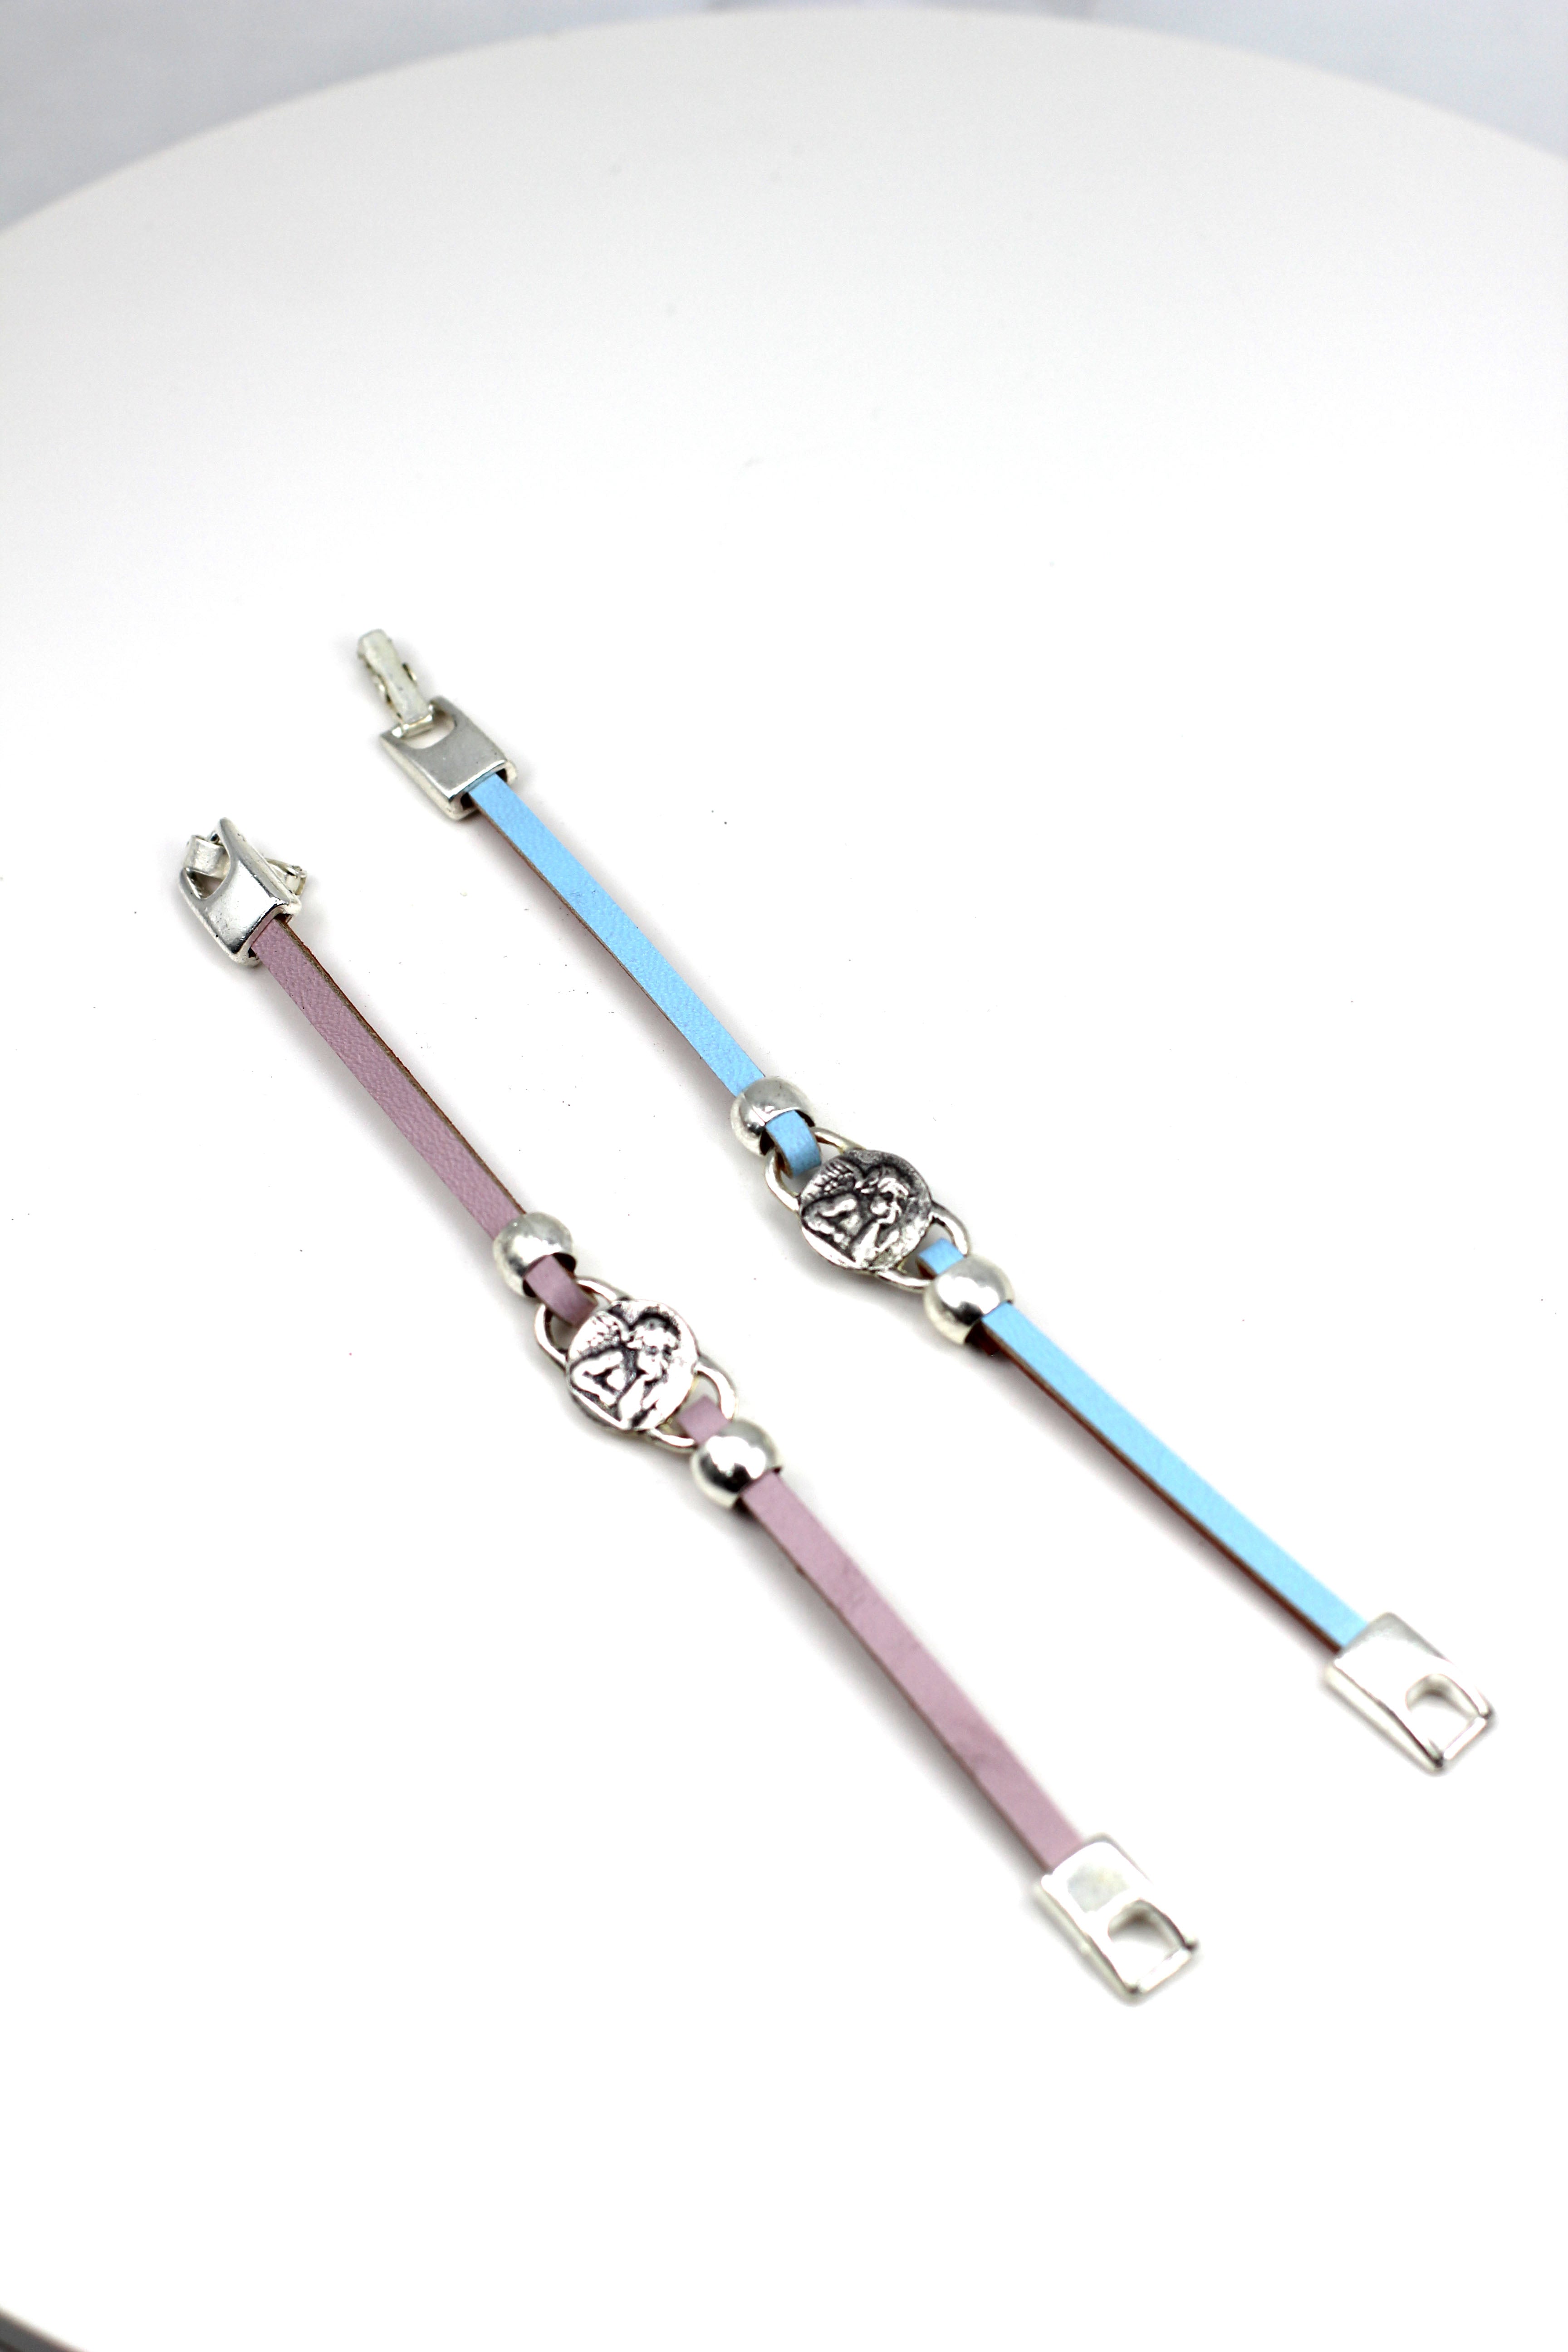 Girls Bracelet of  The Guardian Angel  handmade jewelry with a Single Leather Strap by Graciela's Collection